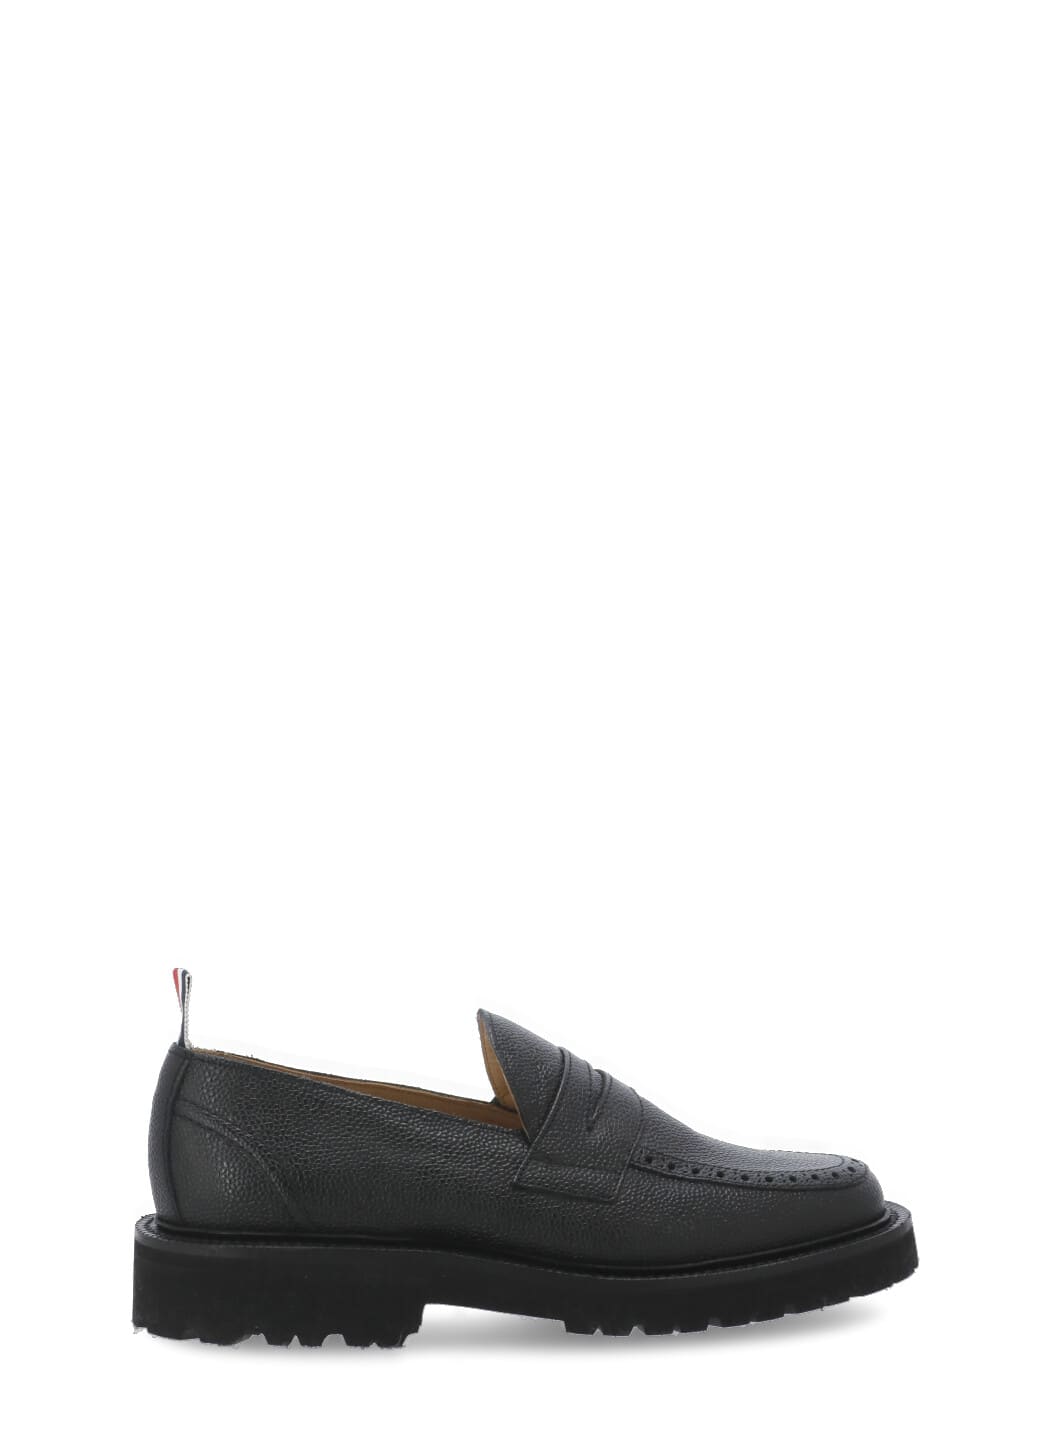 THOM BROWNE HAMMERED LEATHER MOCCASIN